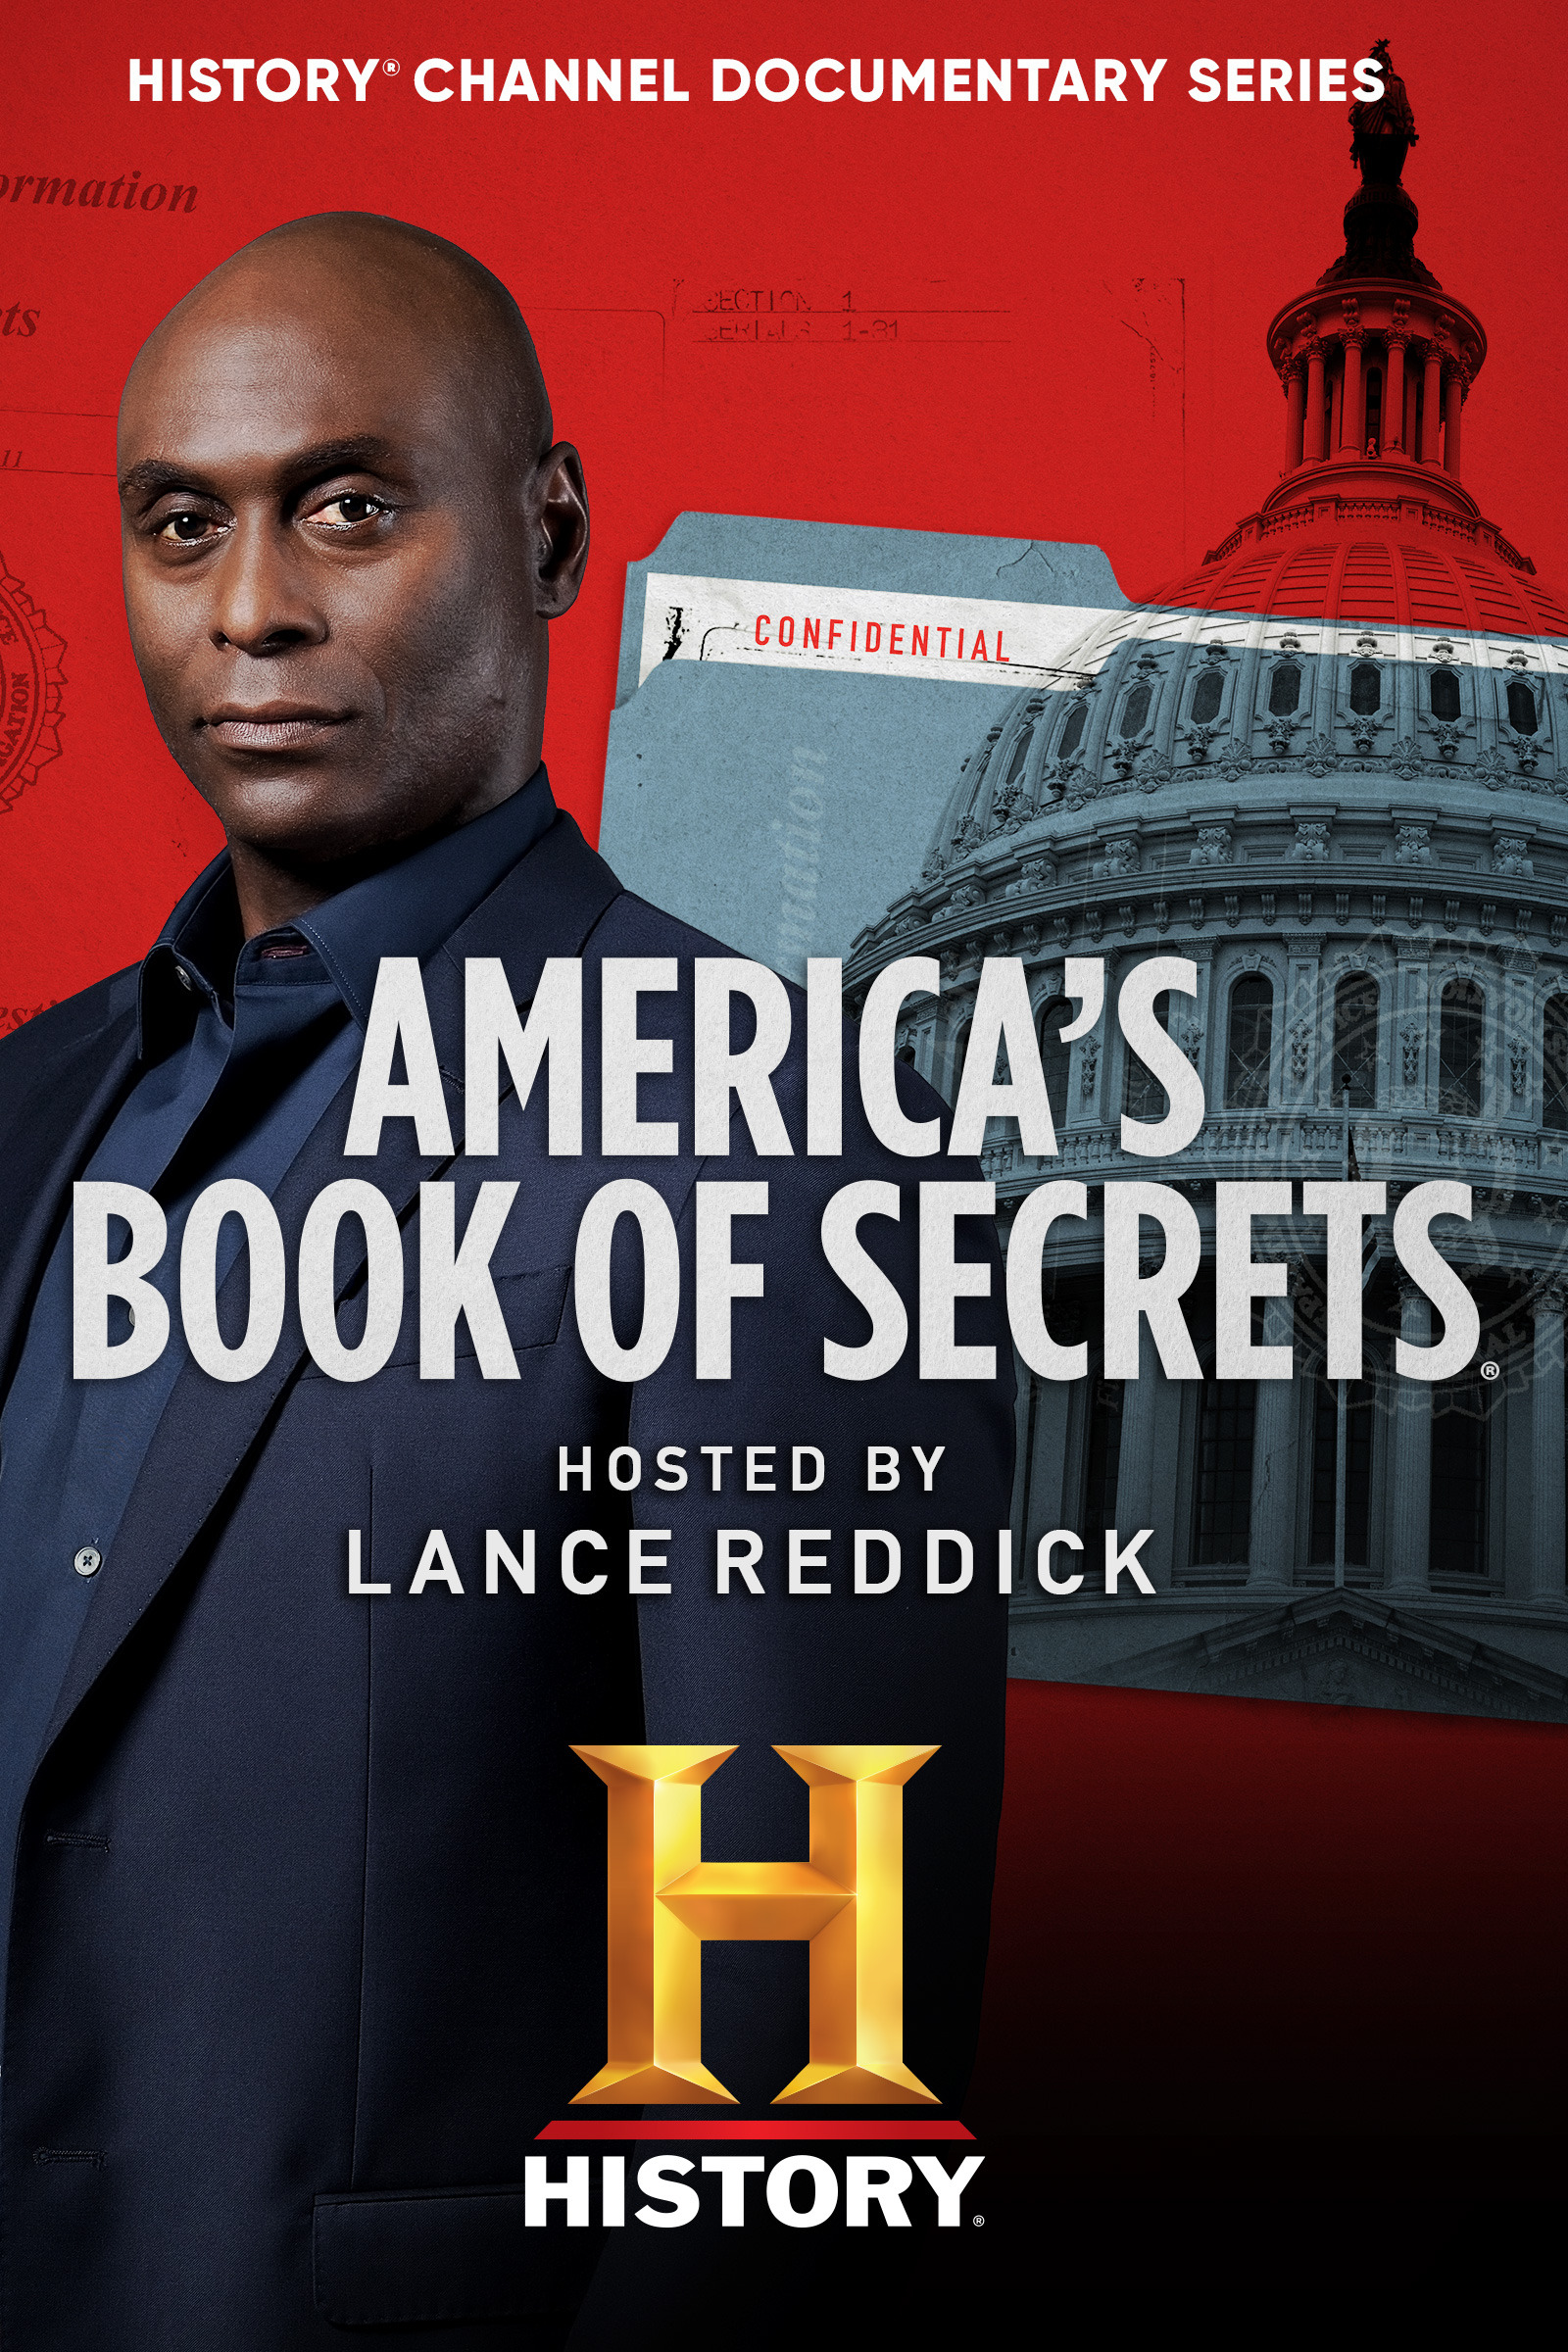 Mega Sized Movie Poster Image for America's Book of Secrets 